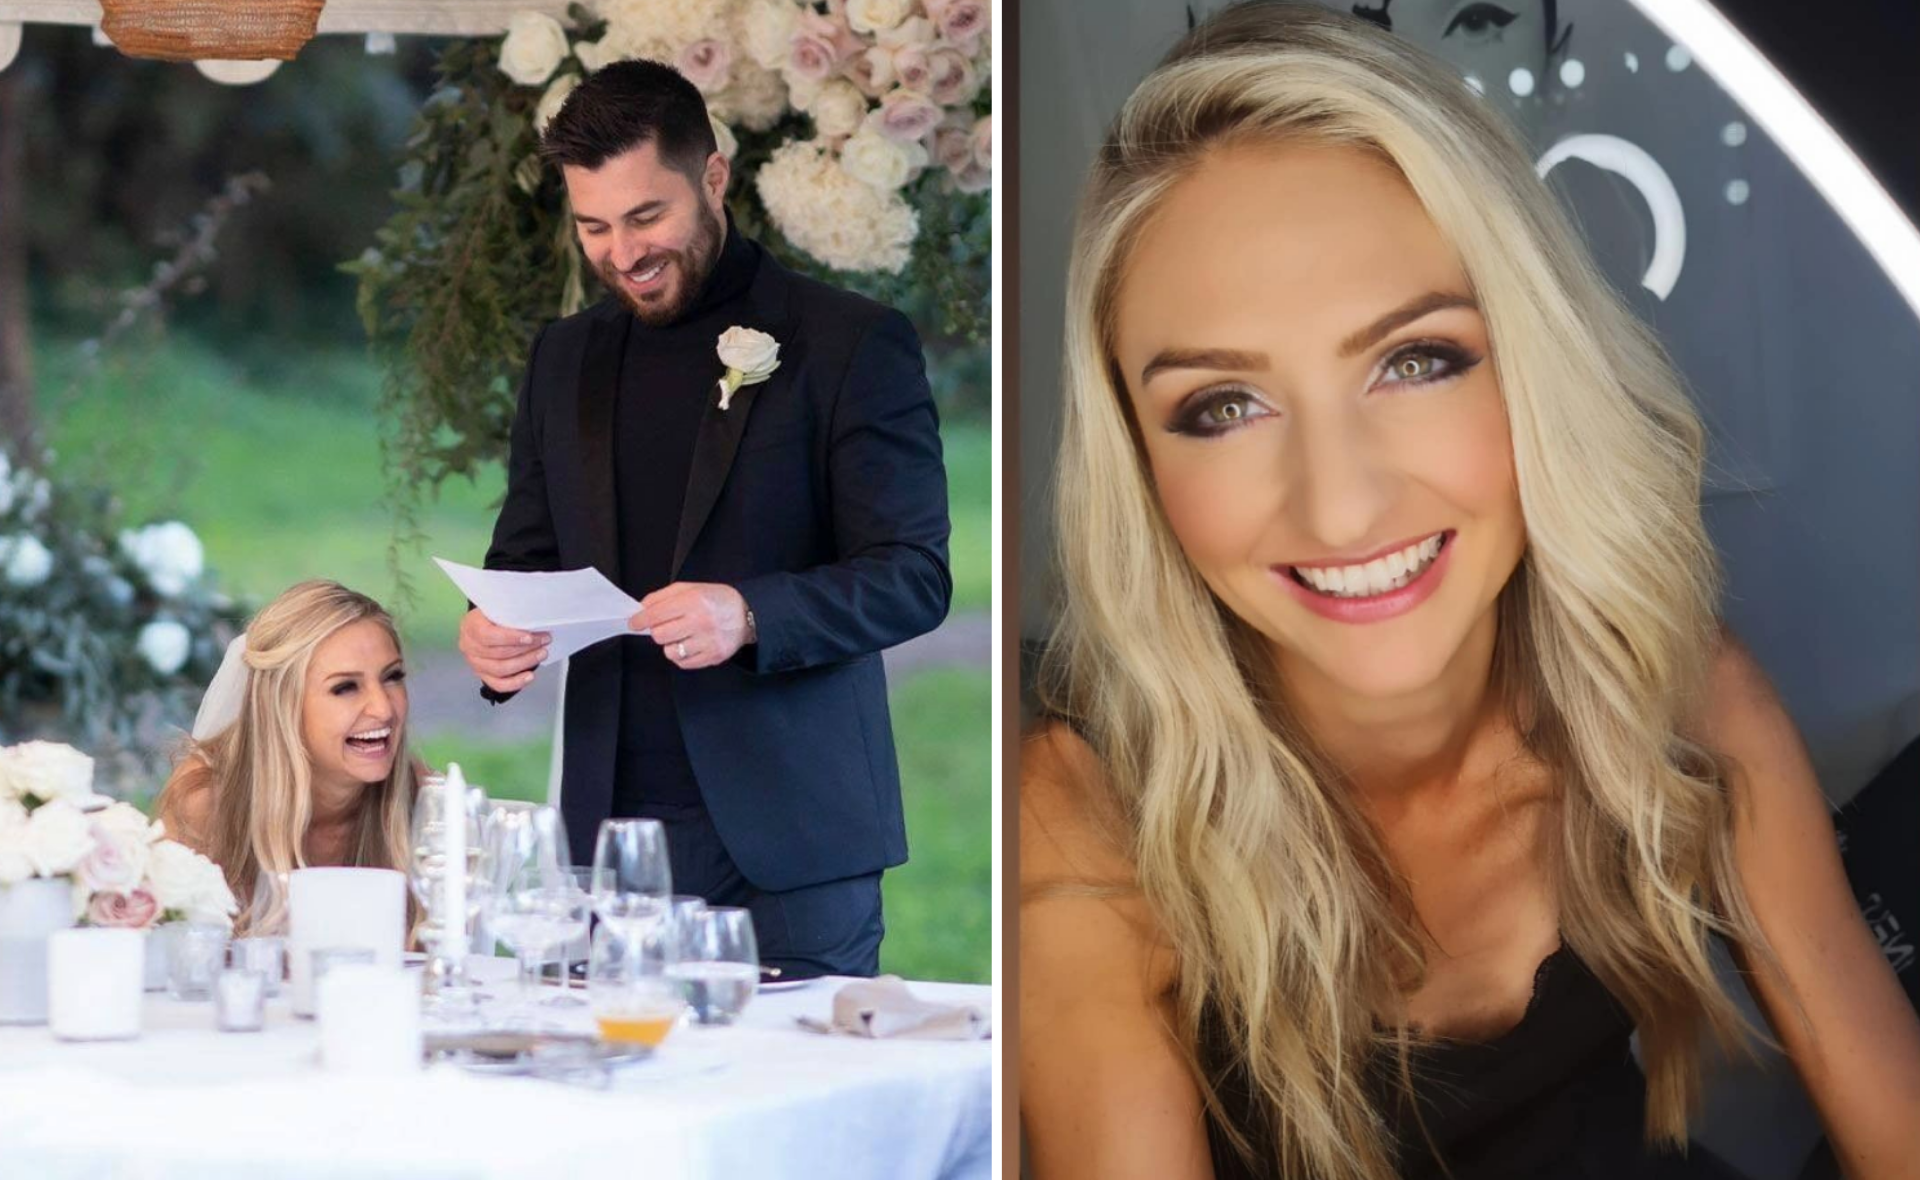 Married At First Sight’s Jo reportedly has a new man and he’s been posting loving pics with her for months